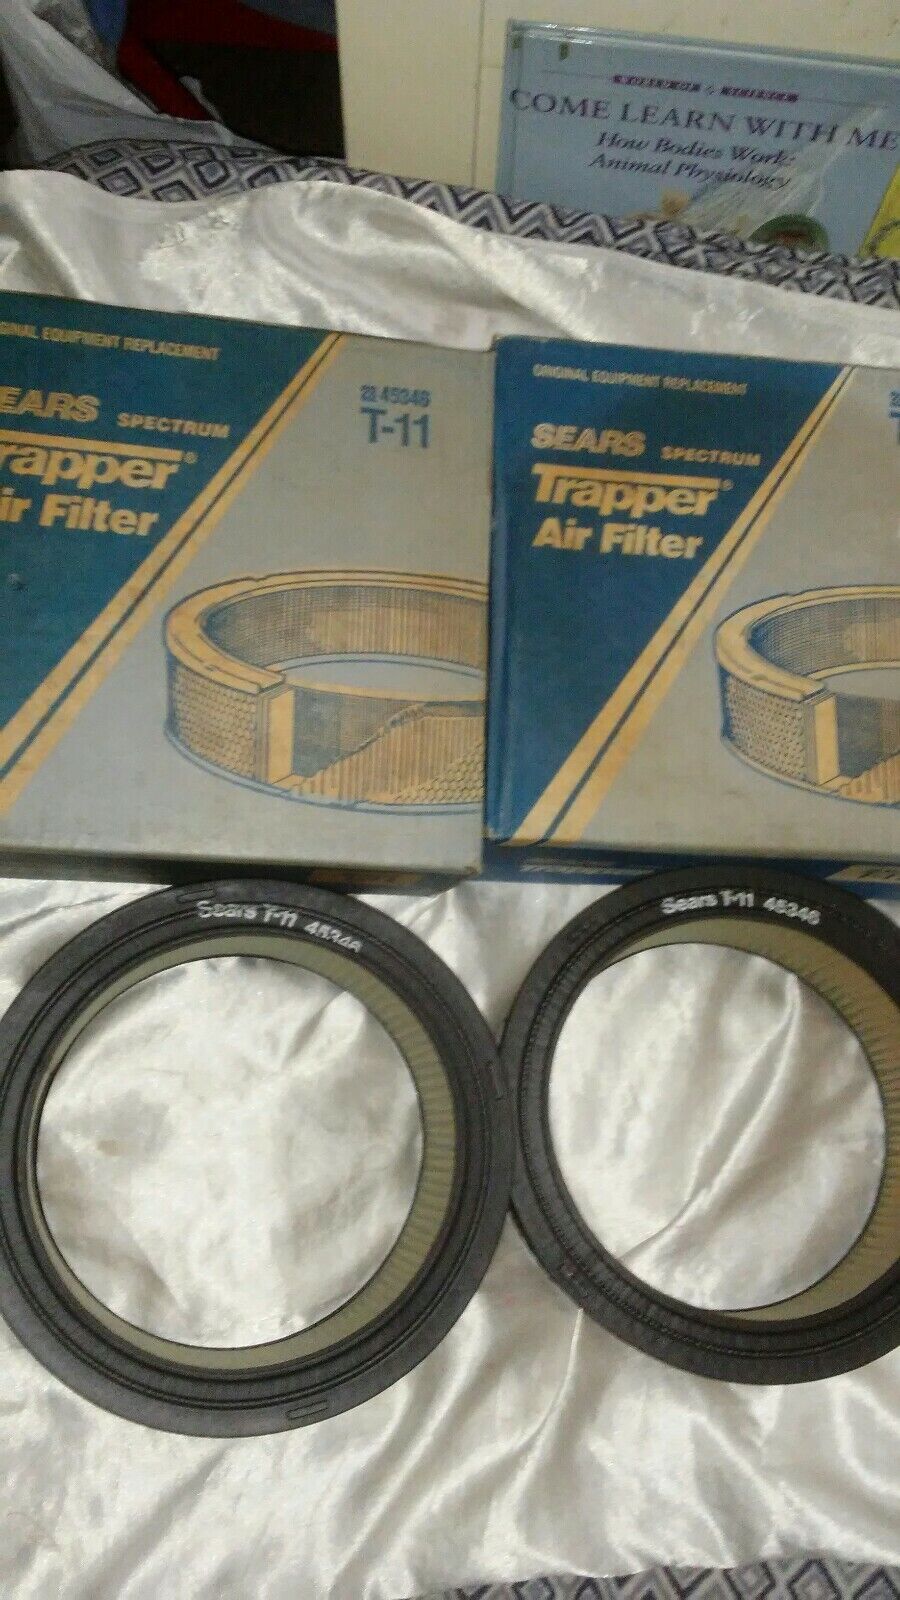 SEARS OEM SPECTRUM TRAPPER AIR FILTER T-11 LOT OF 2